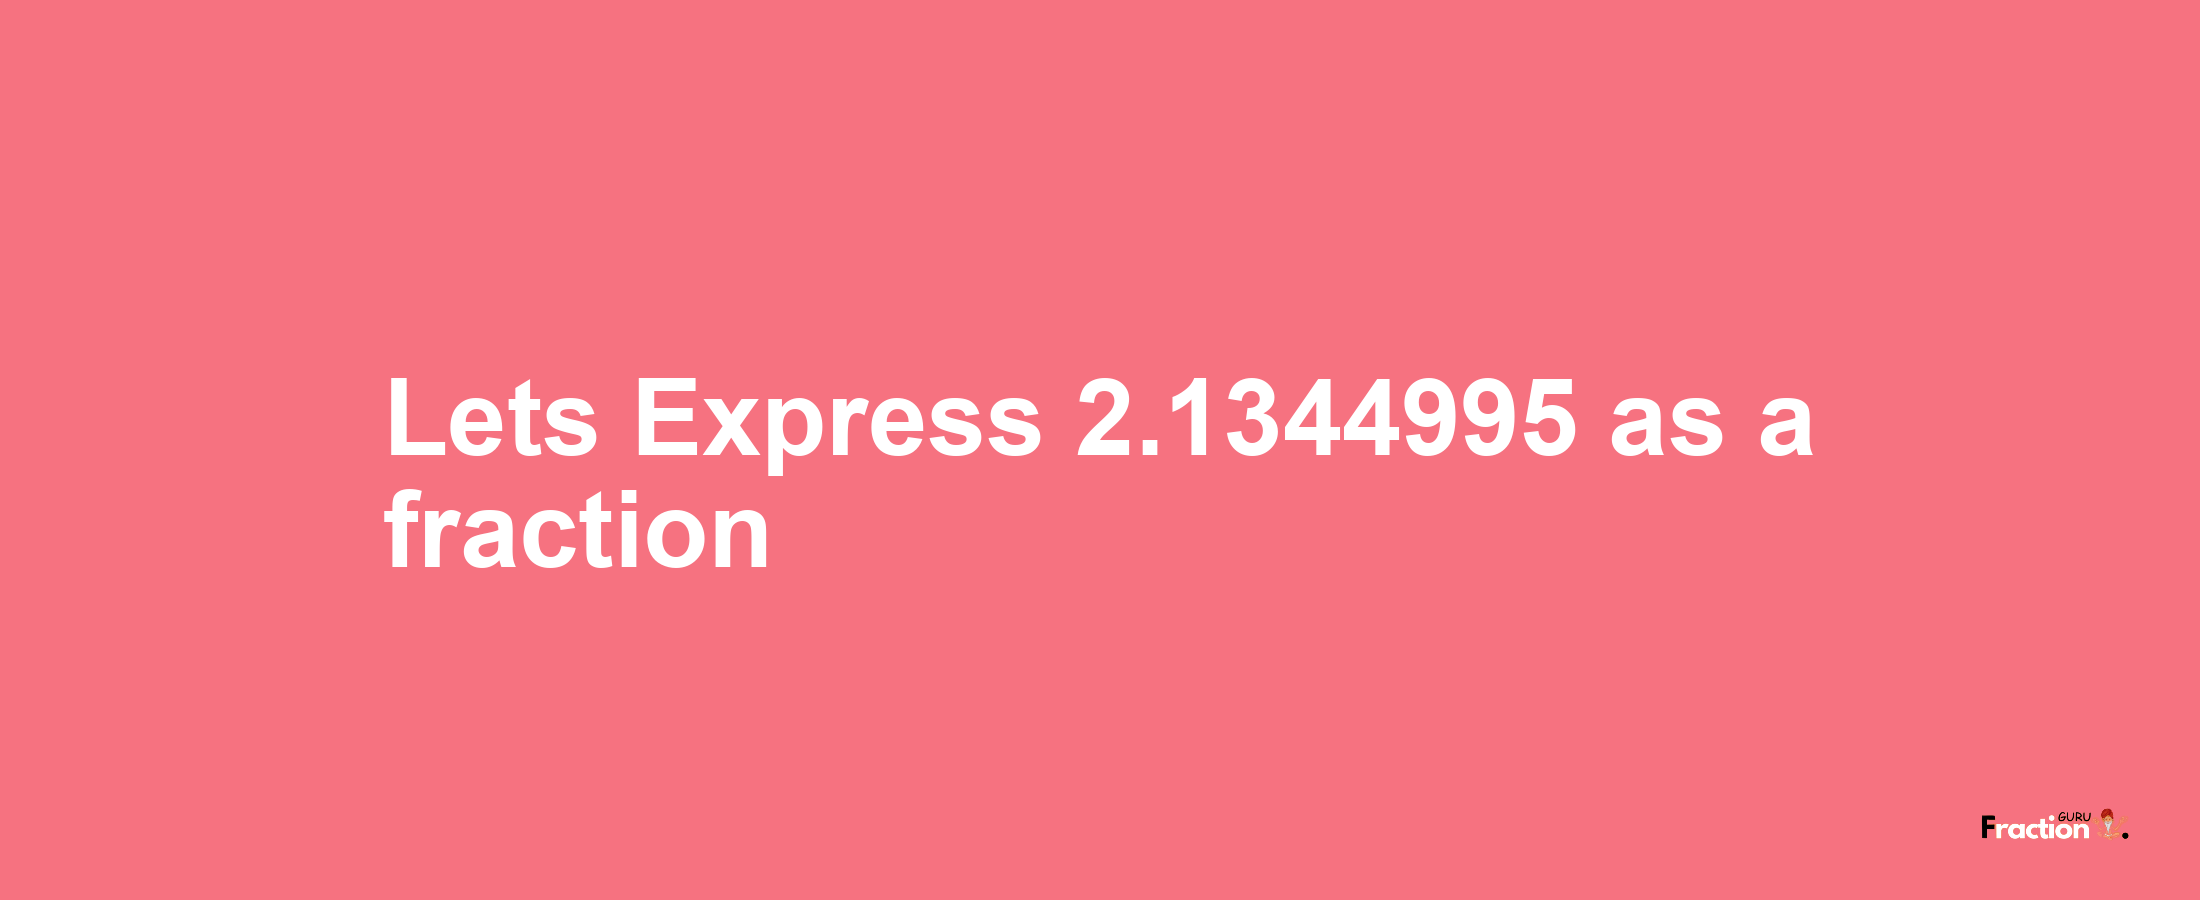 Lets Express 2.1344995 as afraction